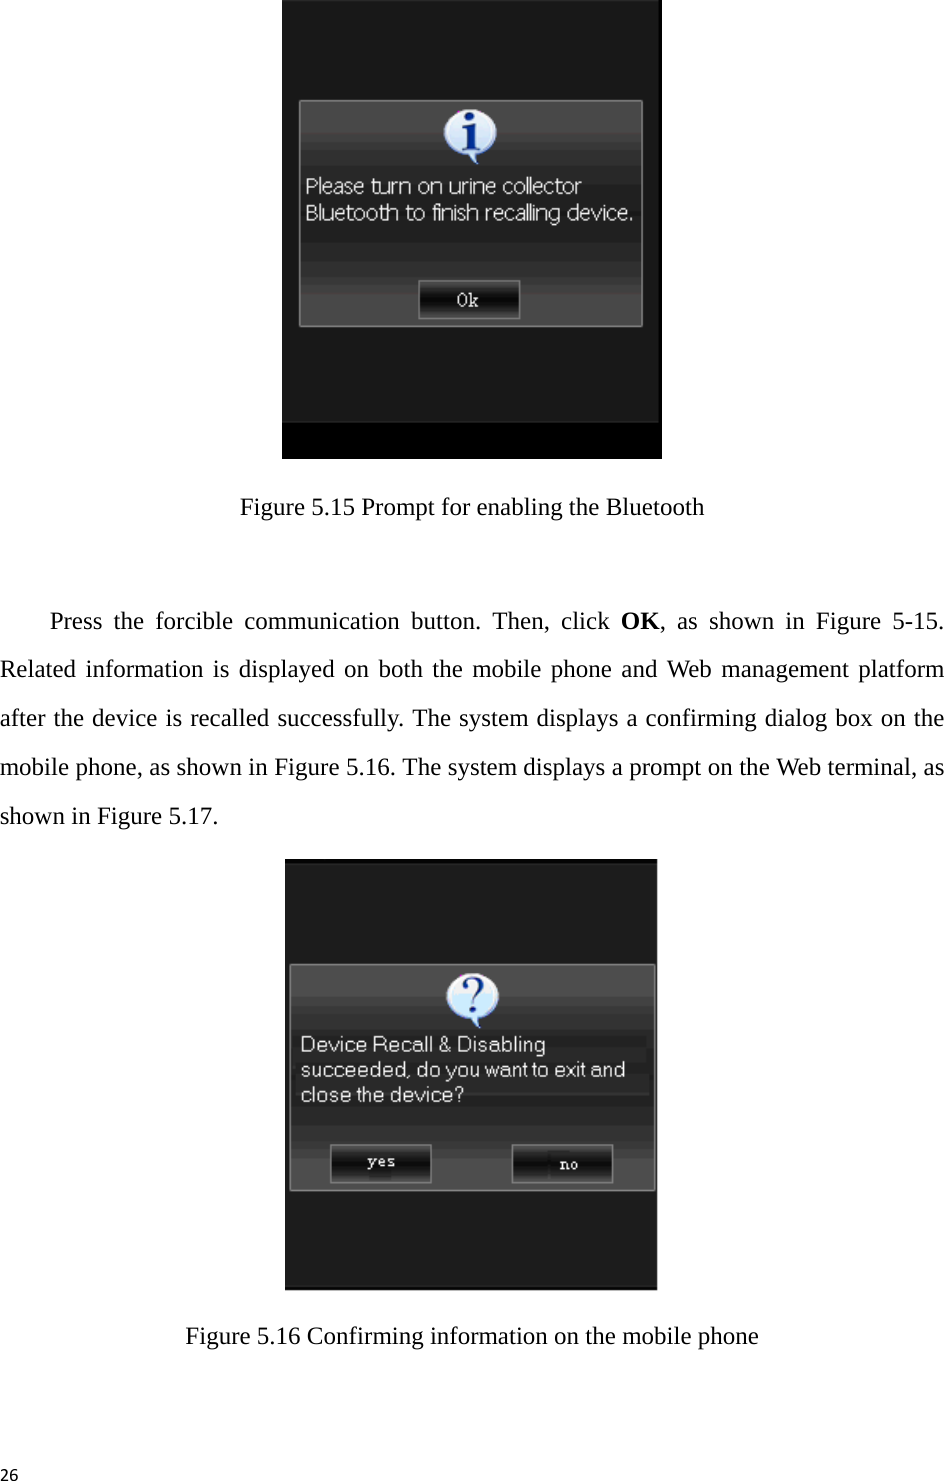 26 Figure 5.15 Prompt for enabling the Bluetooth  Press the forcible communication button. Then, click OK, as shown in Figure 5-15. Related information is displayed on both the mobile phone and Web management platform after the device is recalled successfully. The system displays a confirming dialog box on the mobile phone, as shown in Figure 5.16. The system displays a prompt on the Web terminal, as shown in Figure 5.17.  Figure 5.16 Confirming information on the mobile phone  